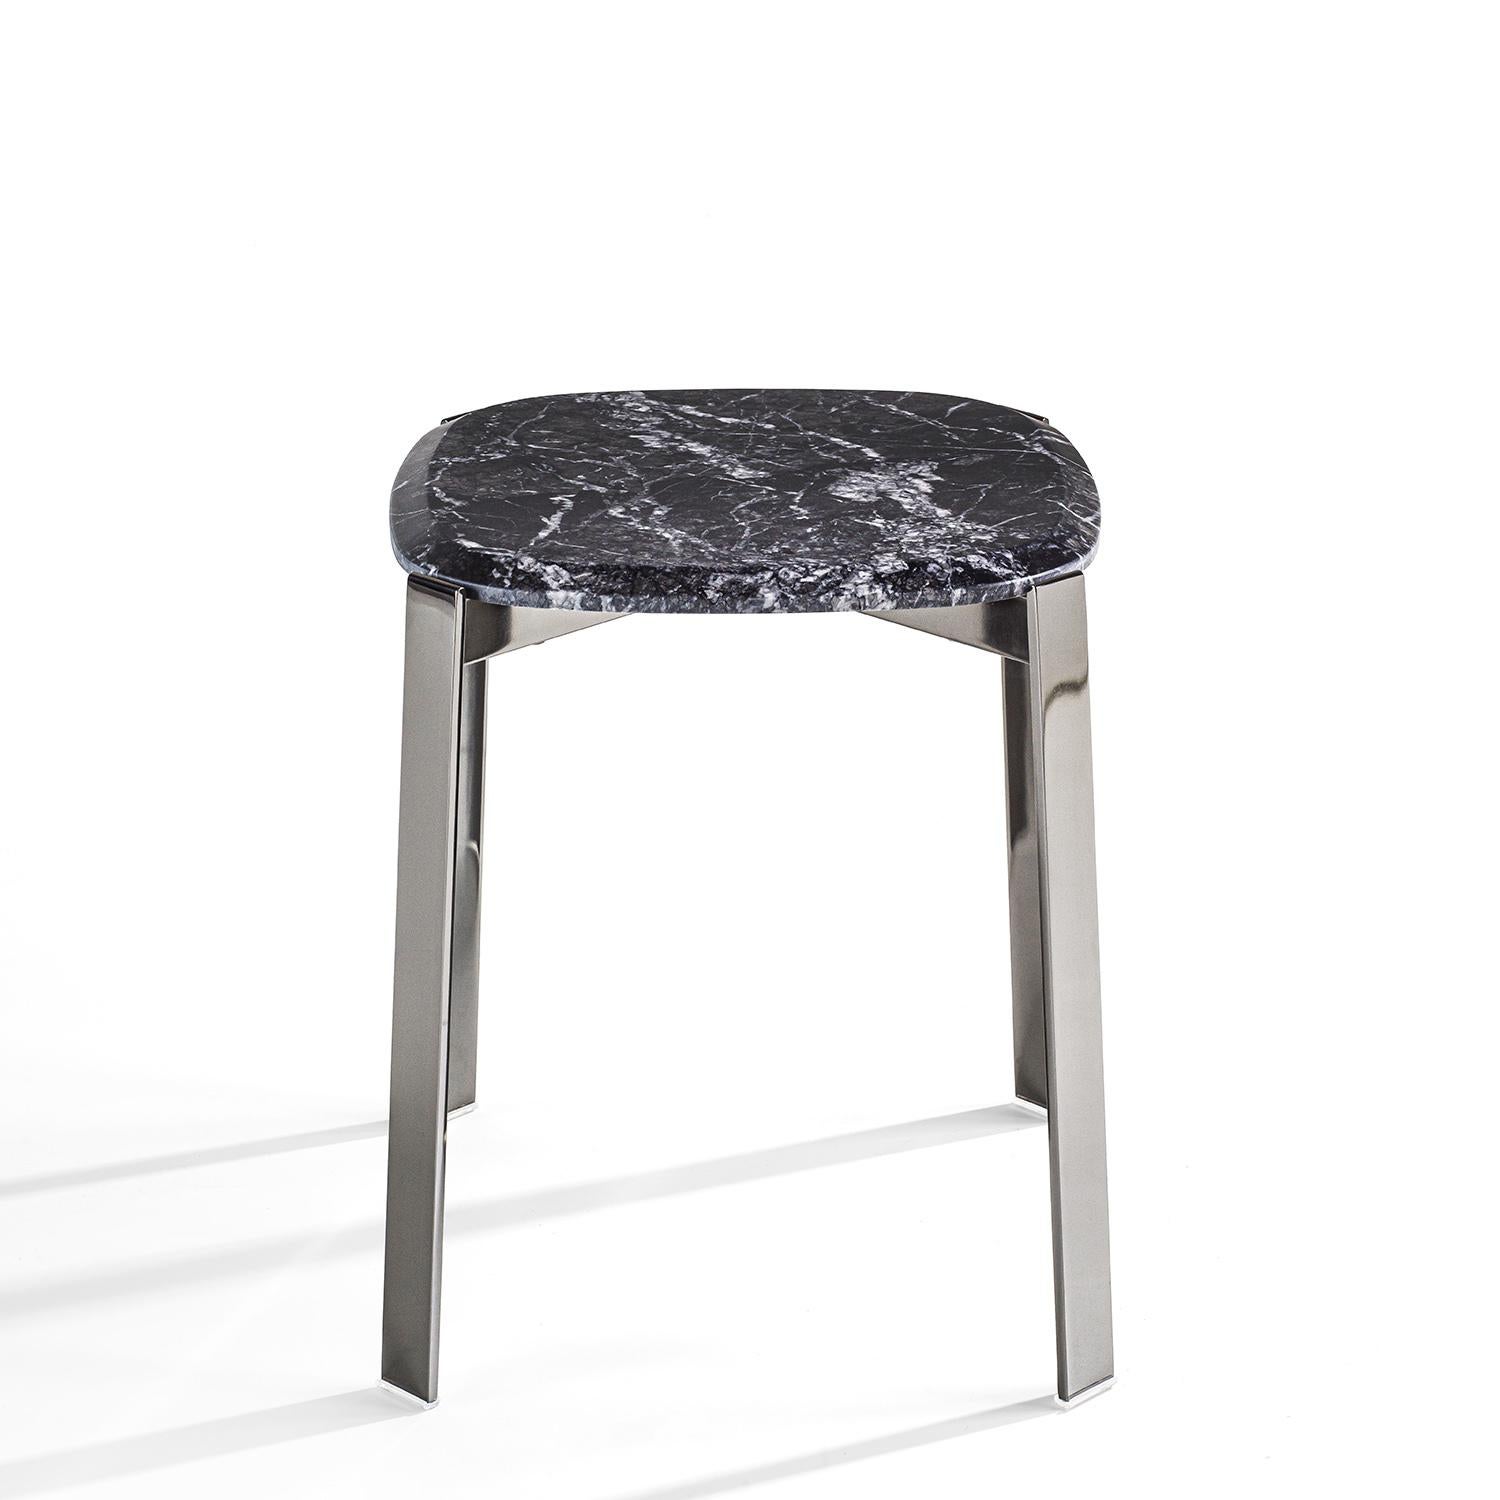 Side Table Peter Black with chromed metal
structure and with carnico grey marble top.
Also available with black sahara marble or with
white calacatta marble top, on request.